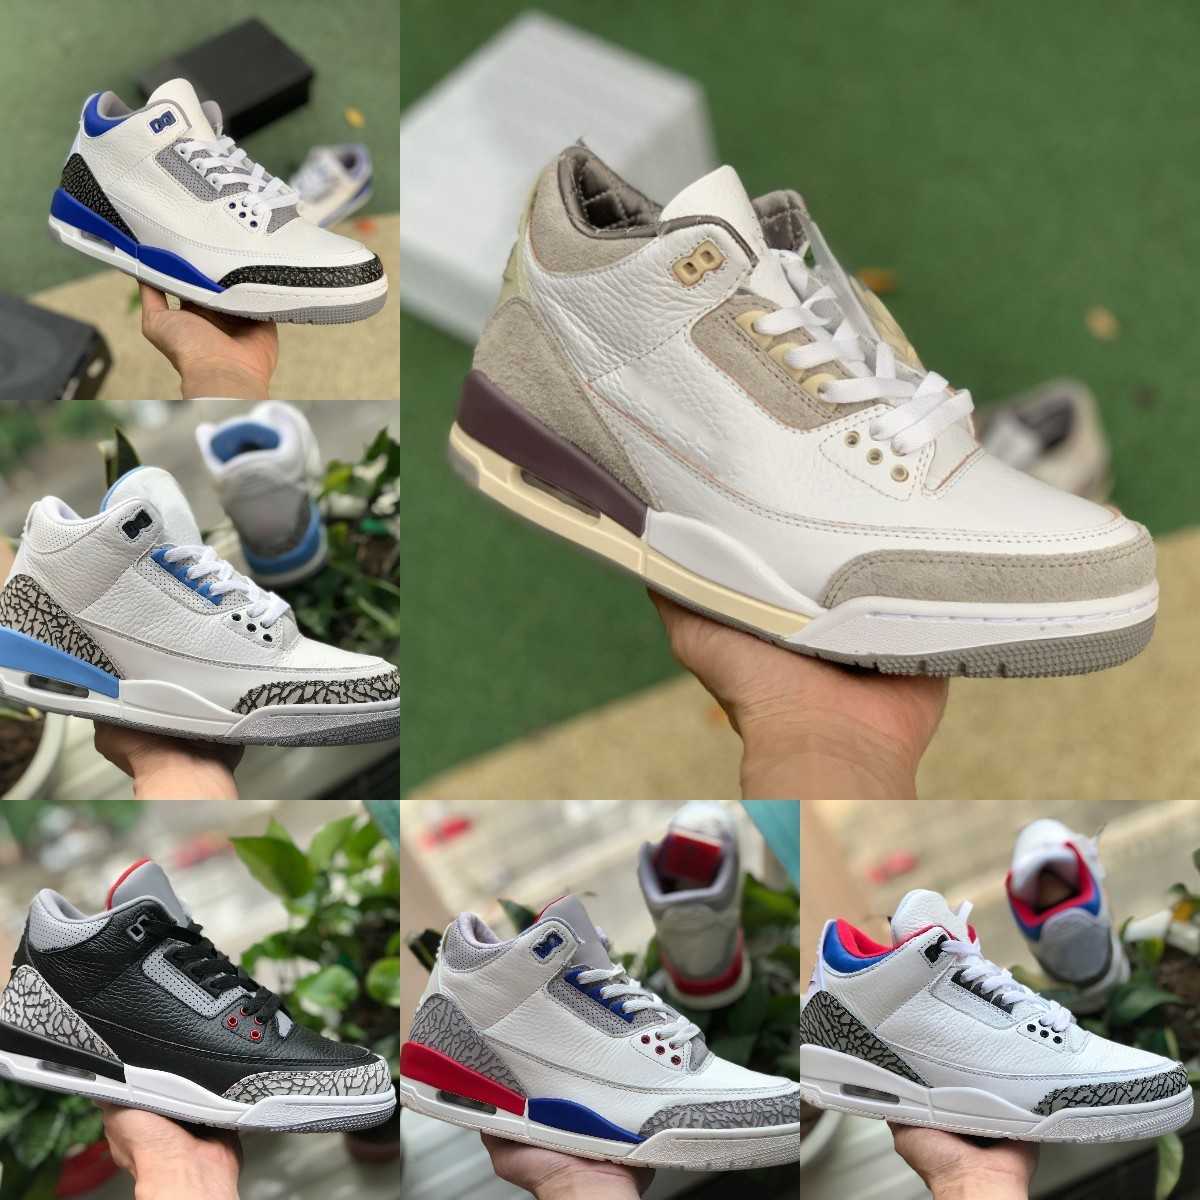 

Jumpman Racer Blue 3 3s Basketball Shoes Mens Seoul Iirs Cool Grey a Ma Maniere Unc Fragment Knicks Free Throw Line Denim Red Black Cement Pure White Trainer Sneakers